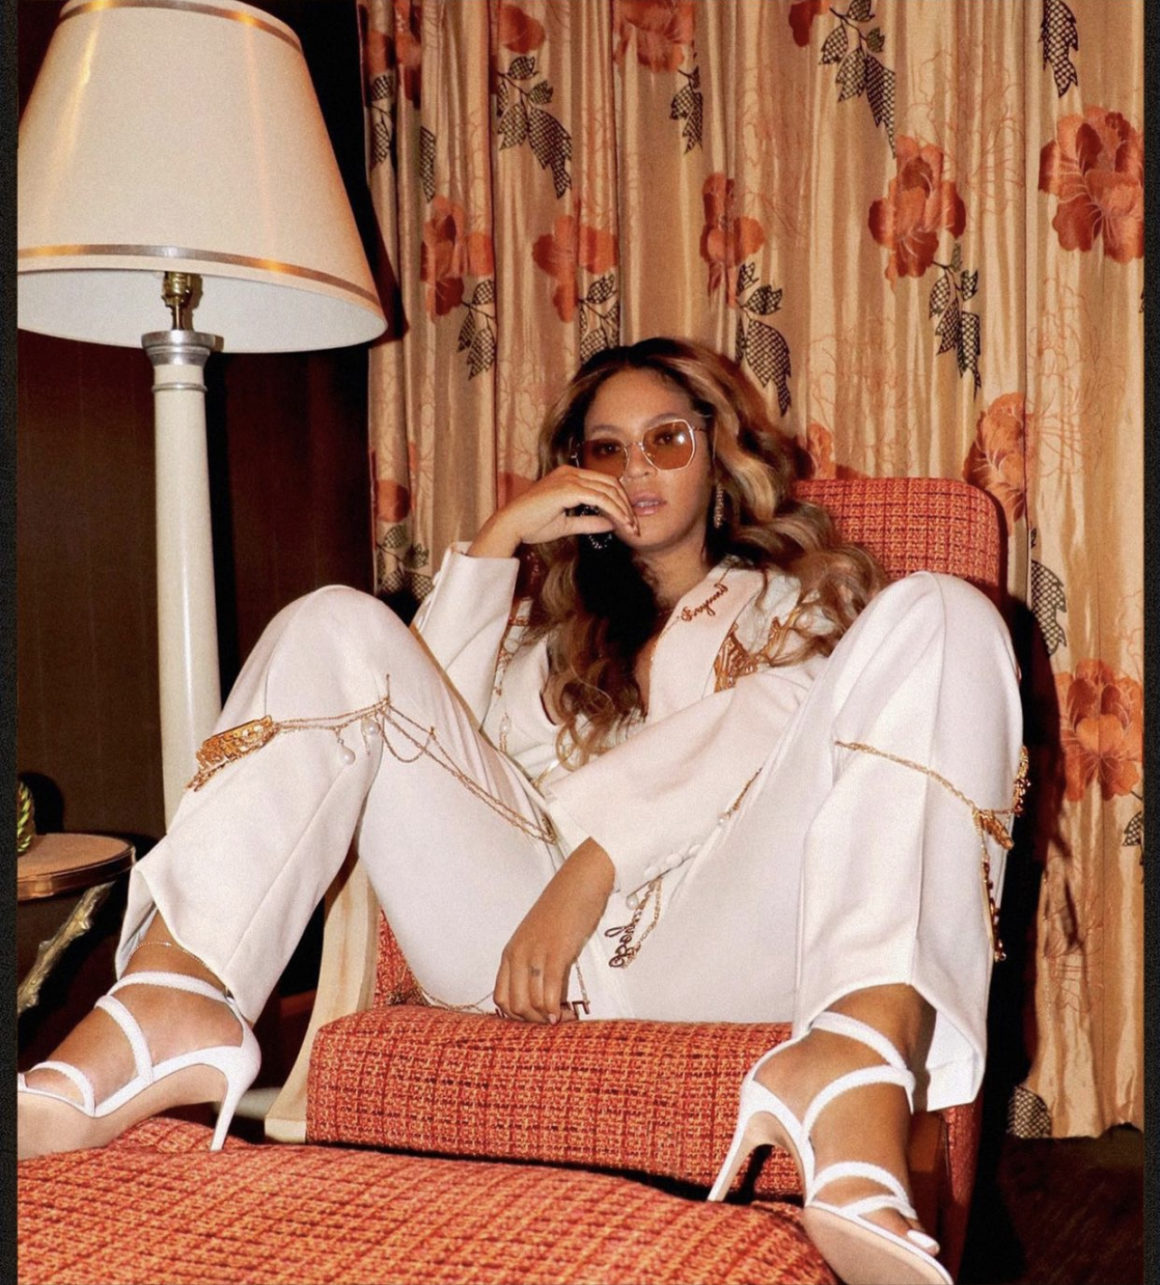 Beyoncé Spotted in Area White Custom NameChain Suit While In Las Vegas